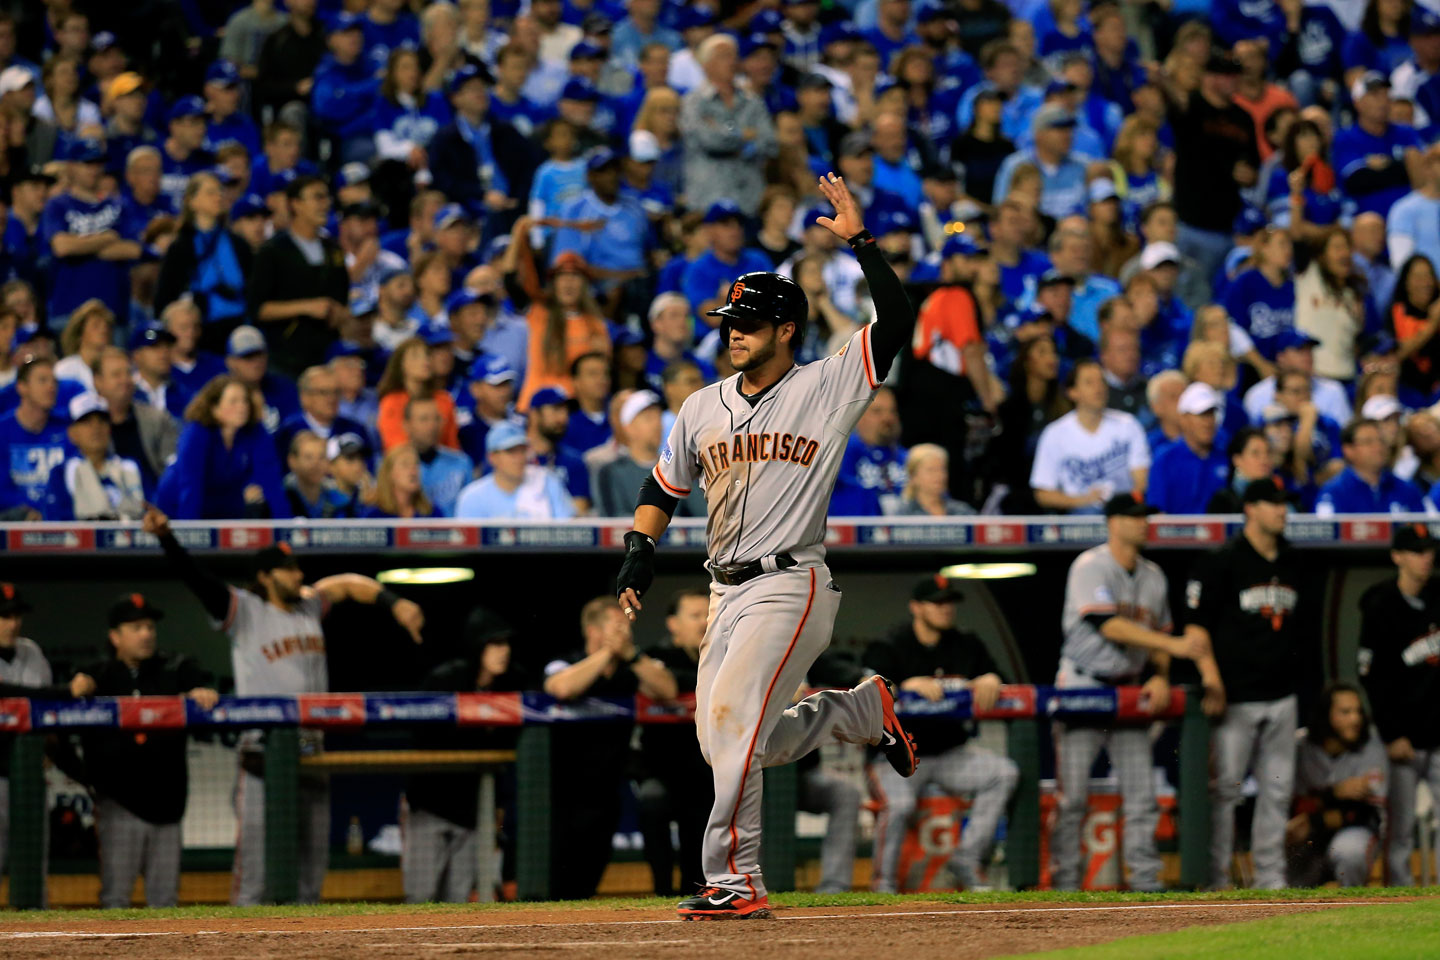 Gregor Blanco, who had singled to lead off the game, trots across the plate on a Pablo Sandoval double in the top of the first. Giants 1, Royals 0.  (Rob Carr/Getty Images)